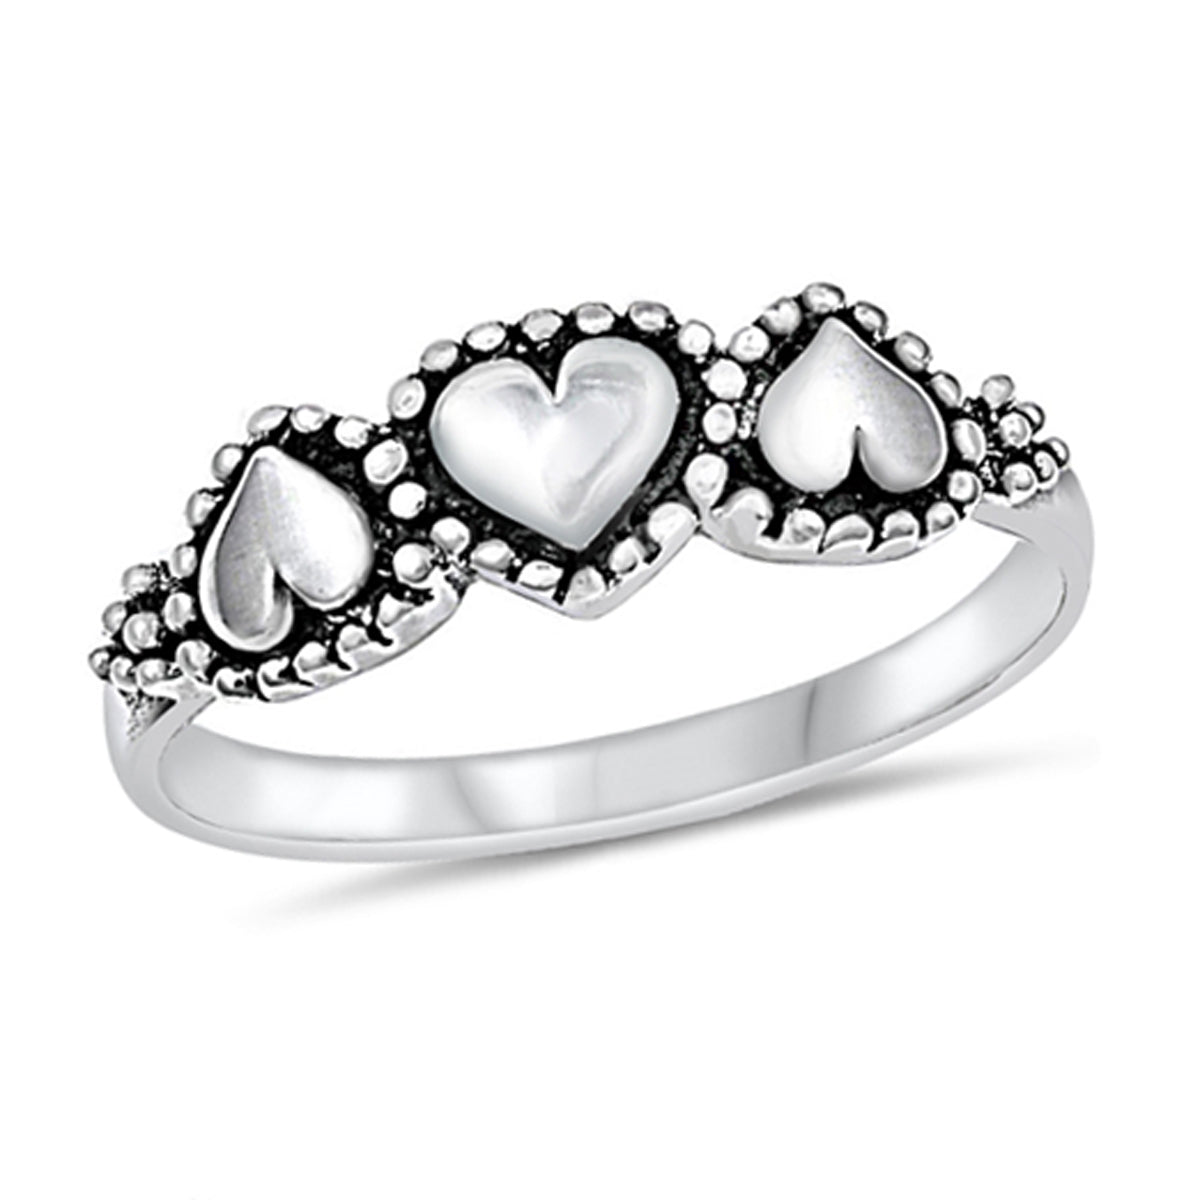 Love One Another Three Hearts Ring Sterling Silver Jewelry